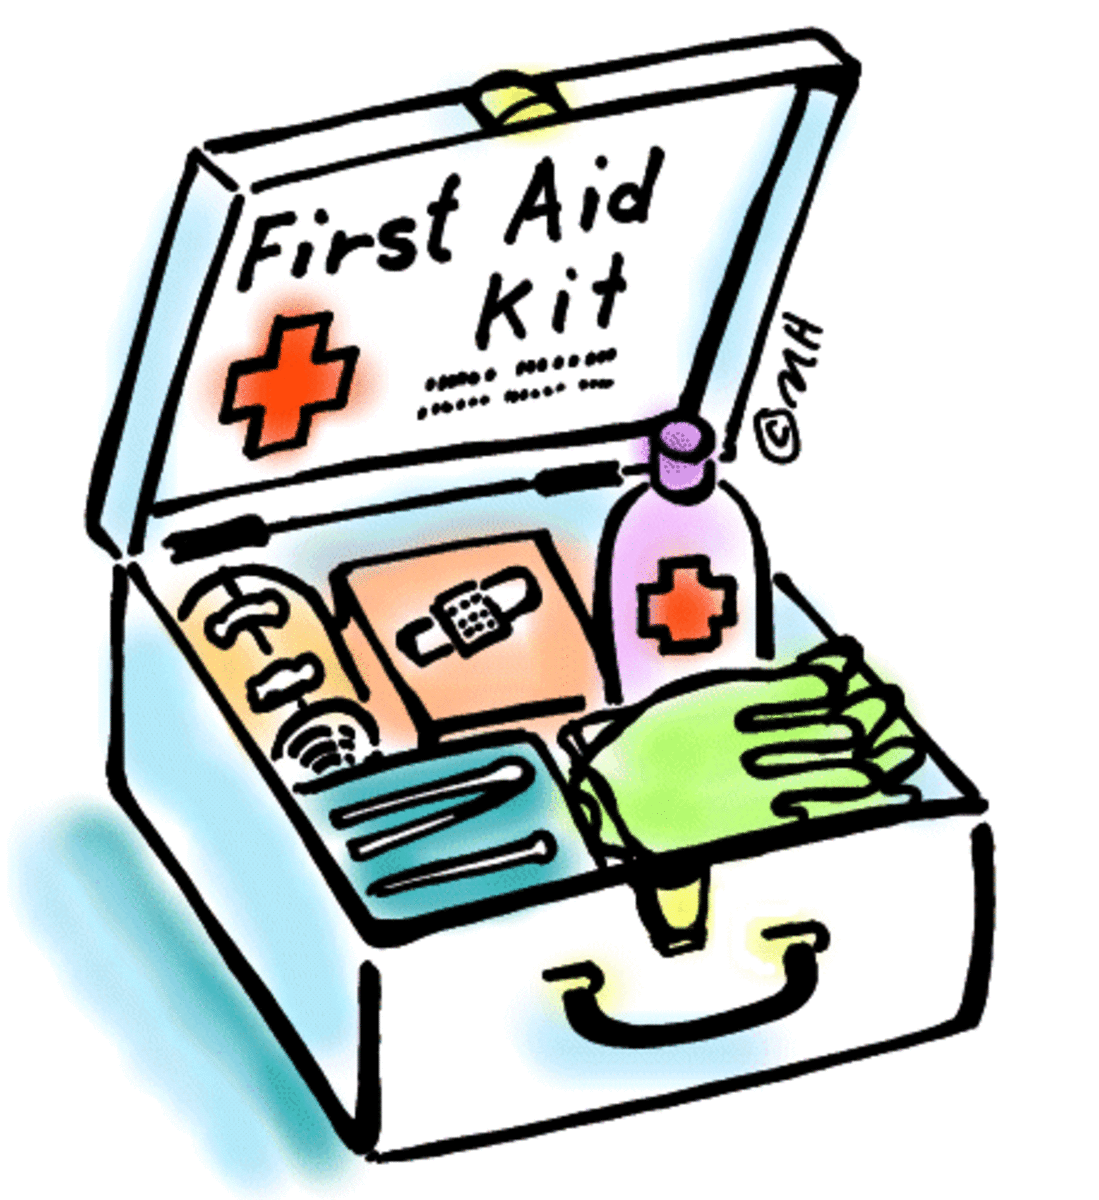 Essentials of a First Aid Kit